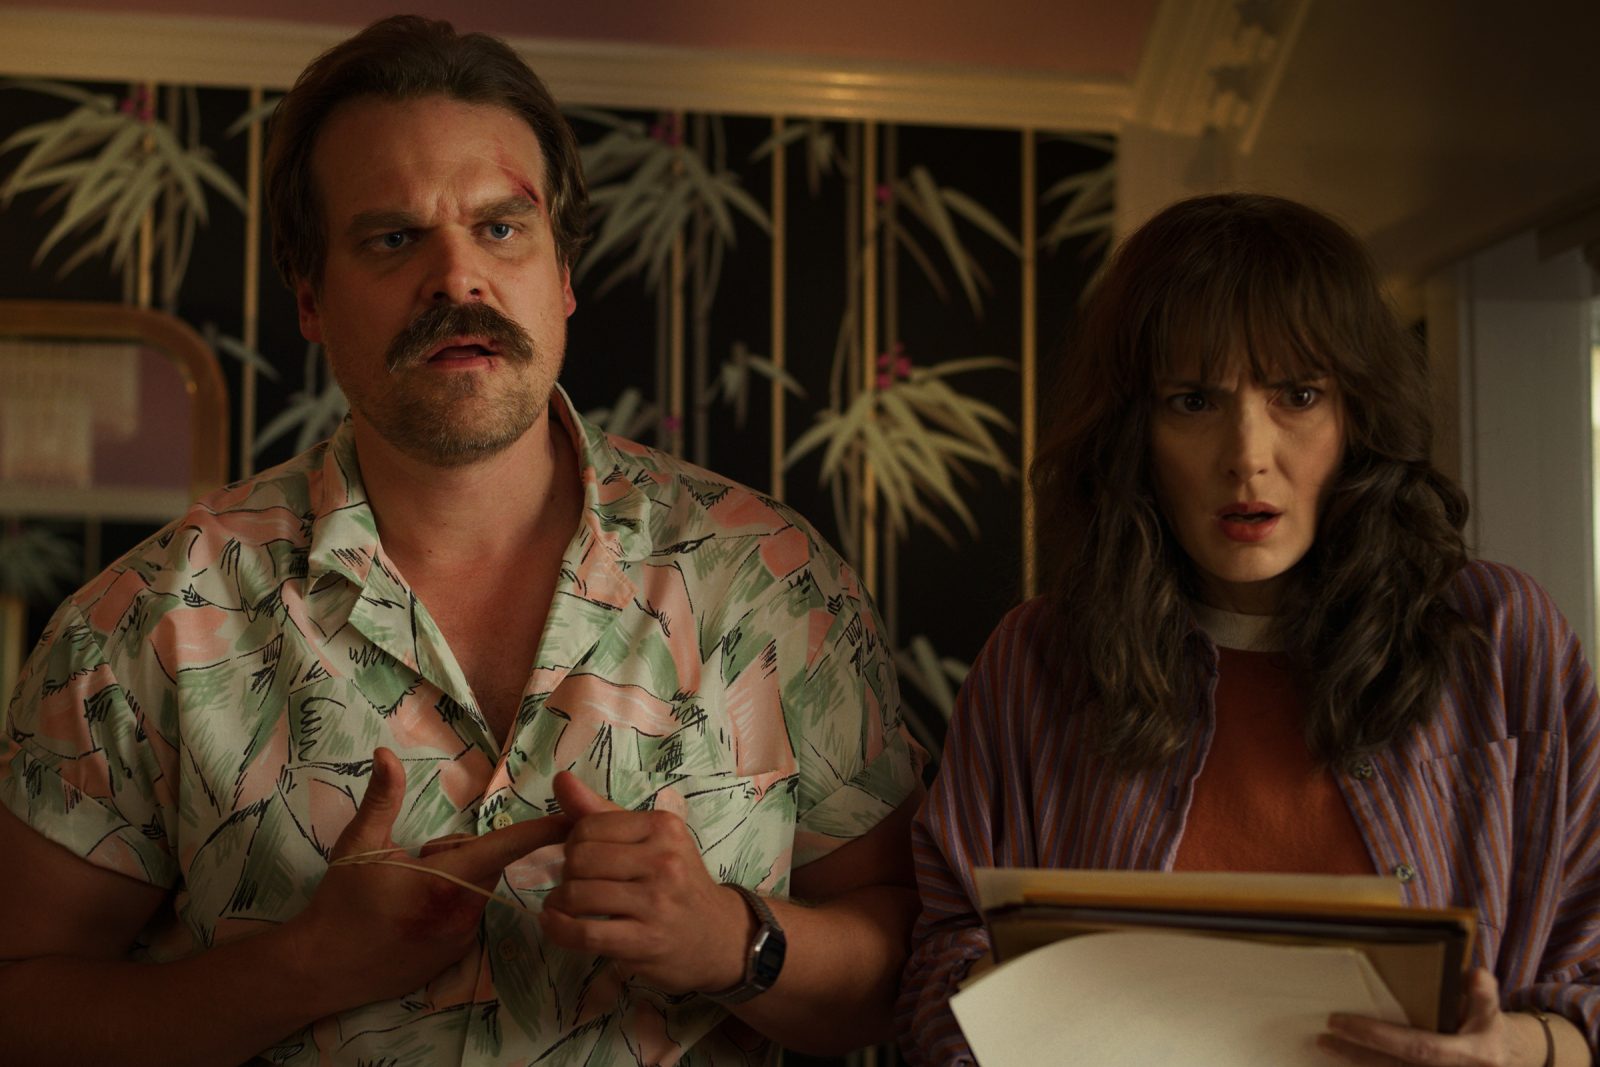 Which Two Stranger Things Characters Are You A Combo Of? Stranger Things Season 3 Hopper